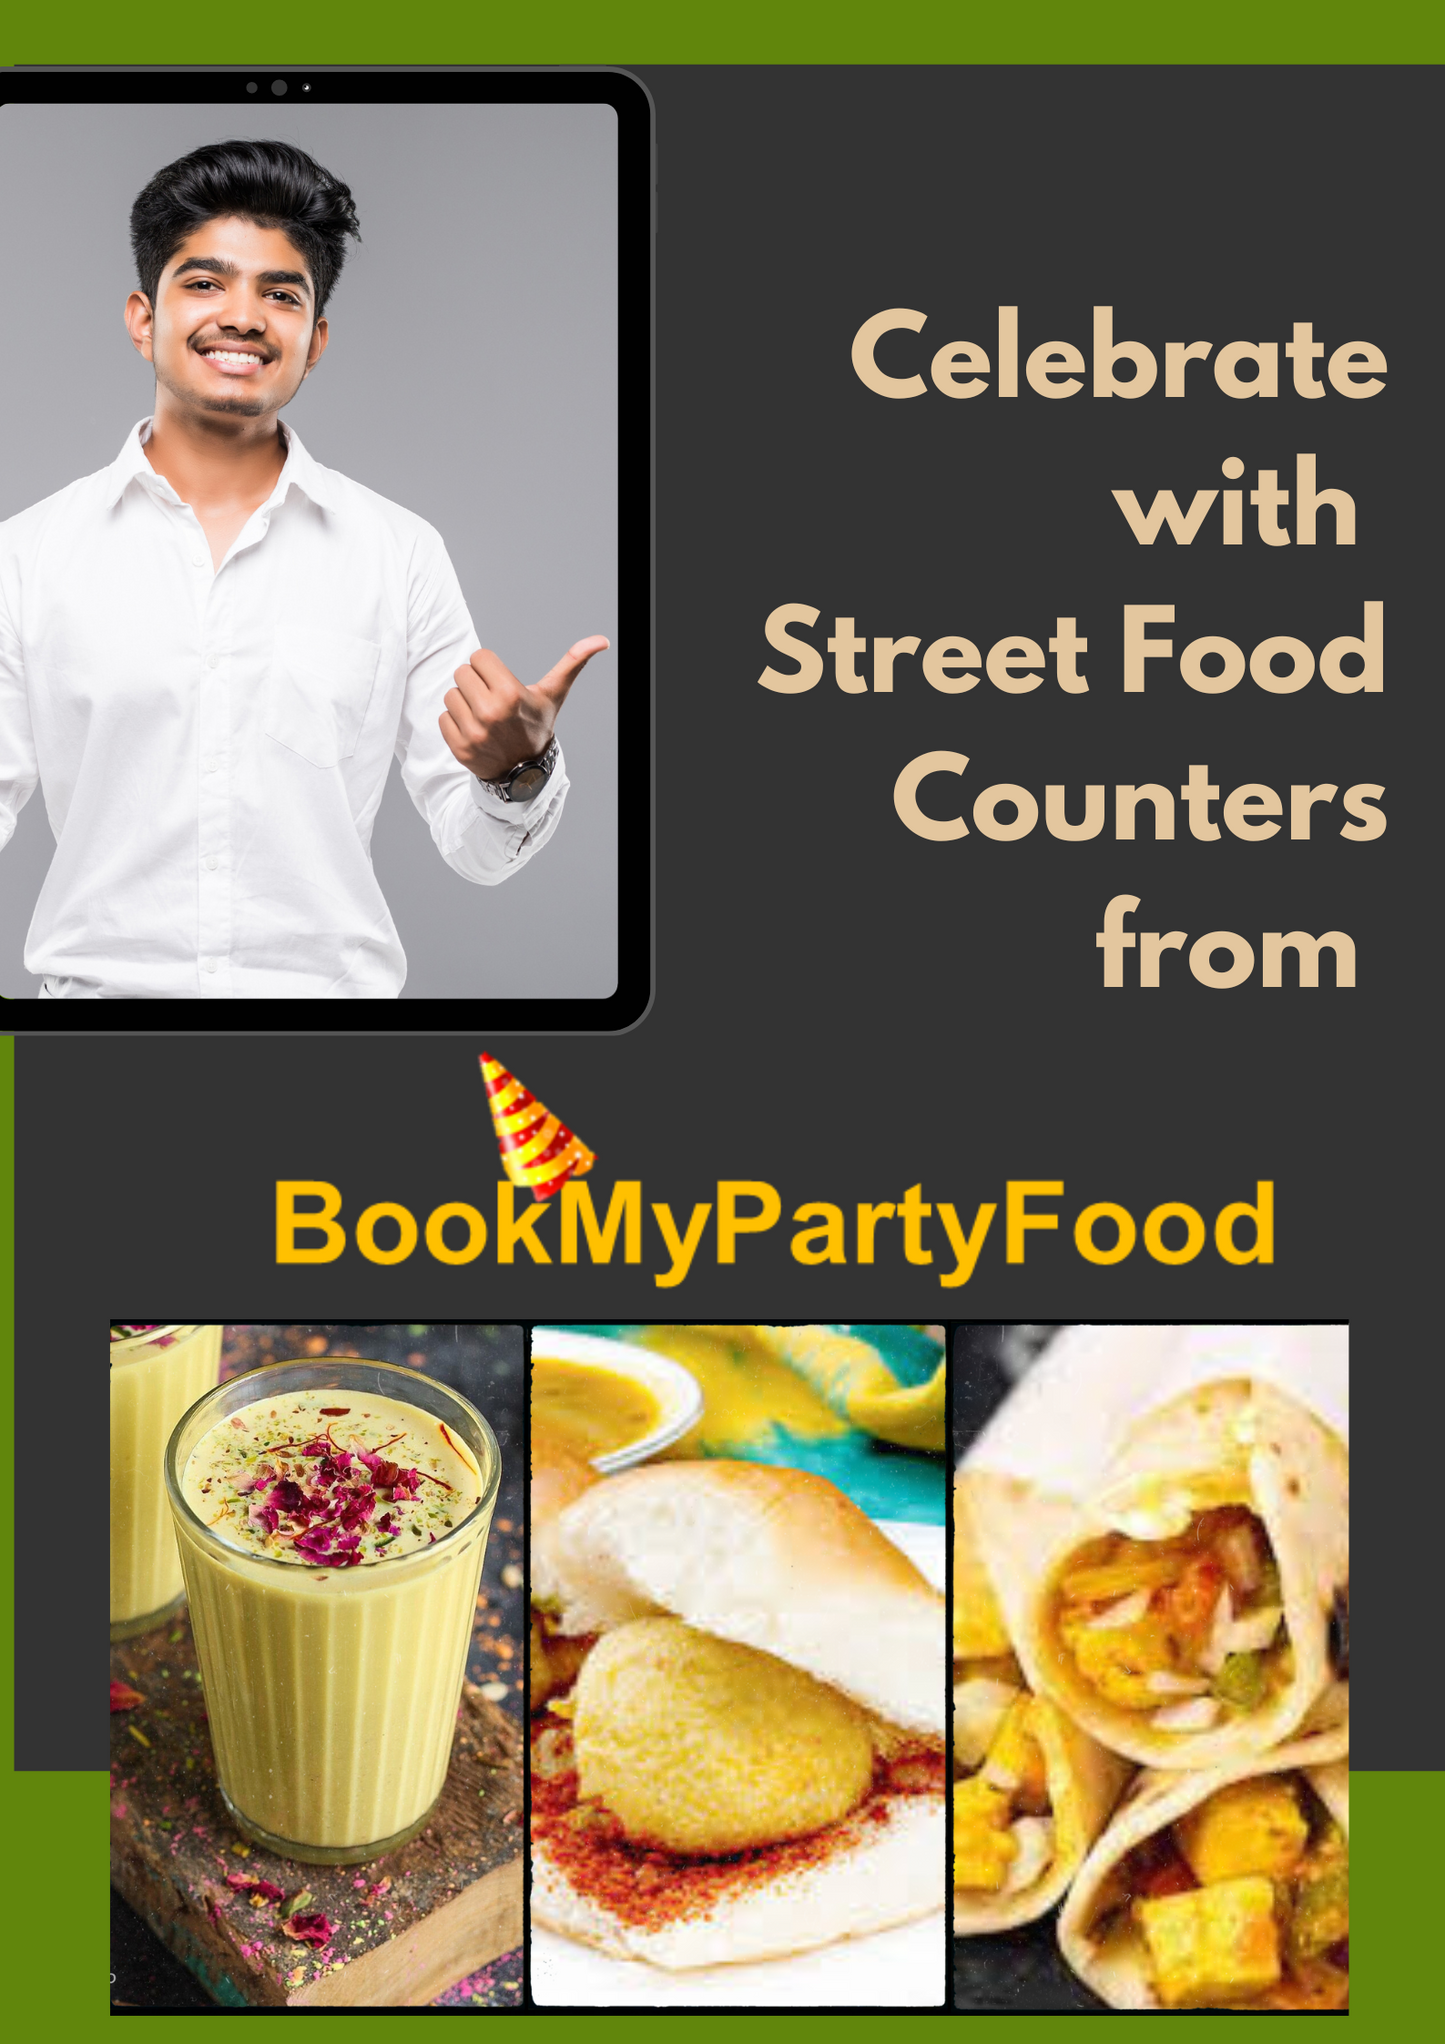 Live Street Food Counters